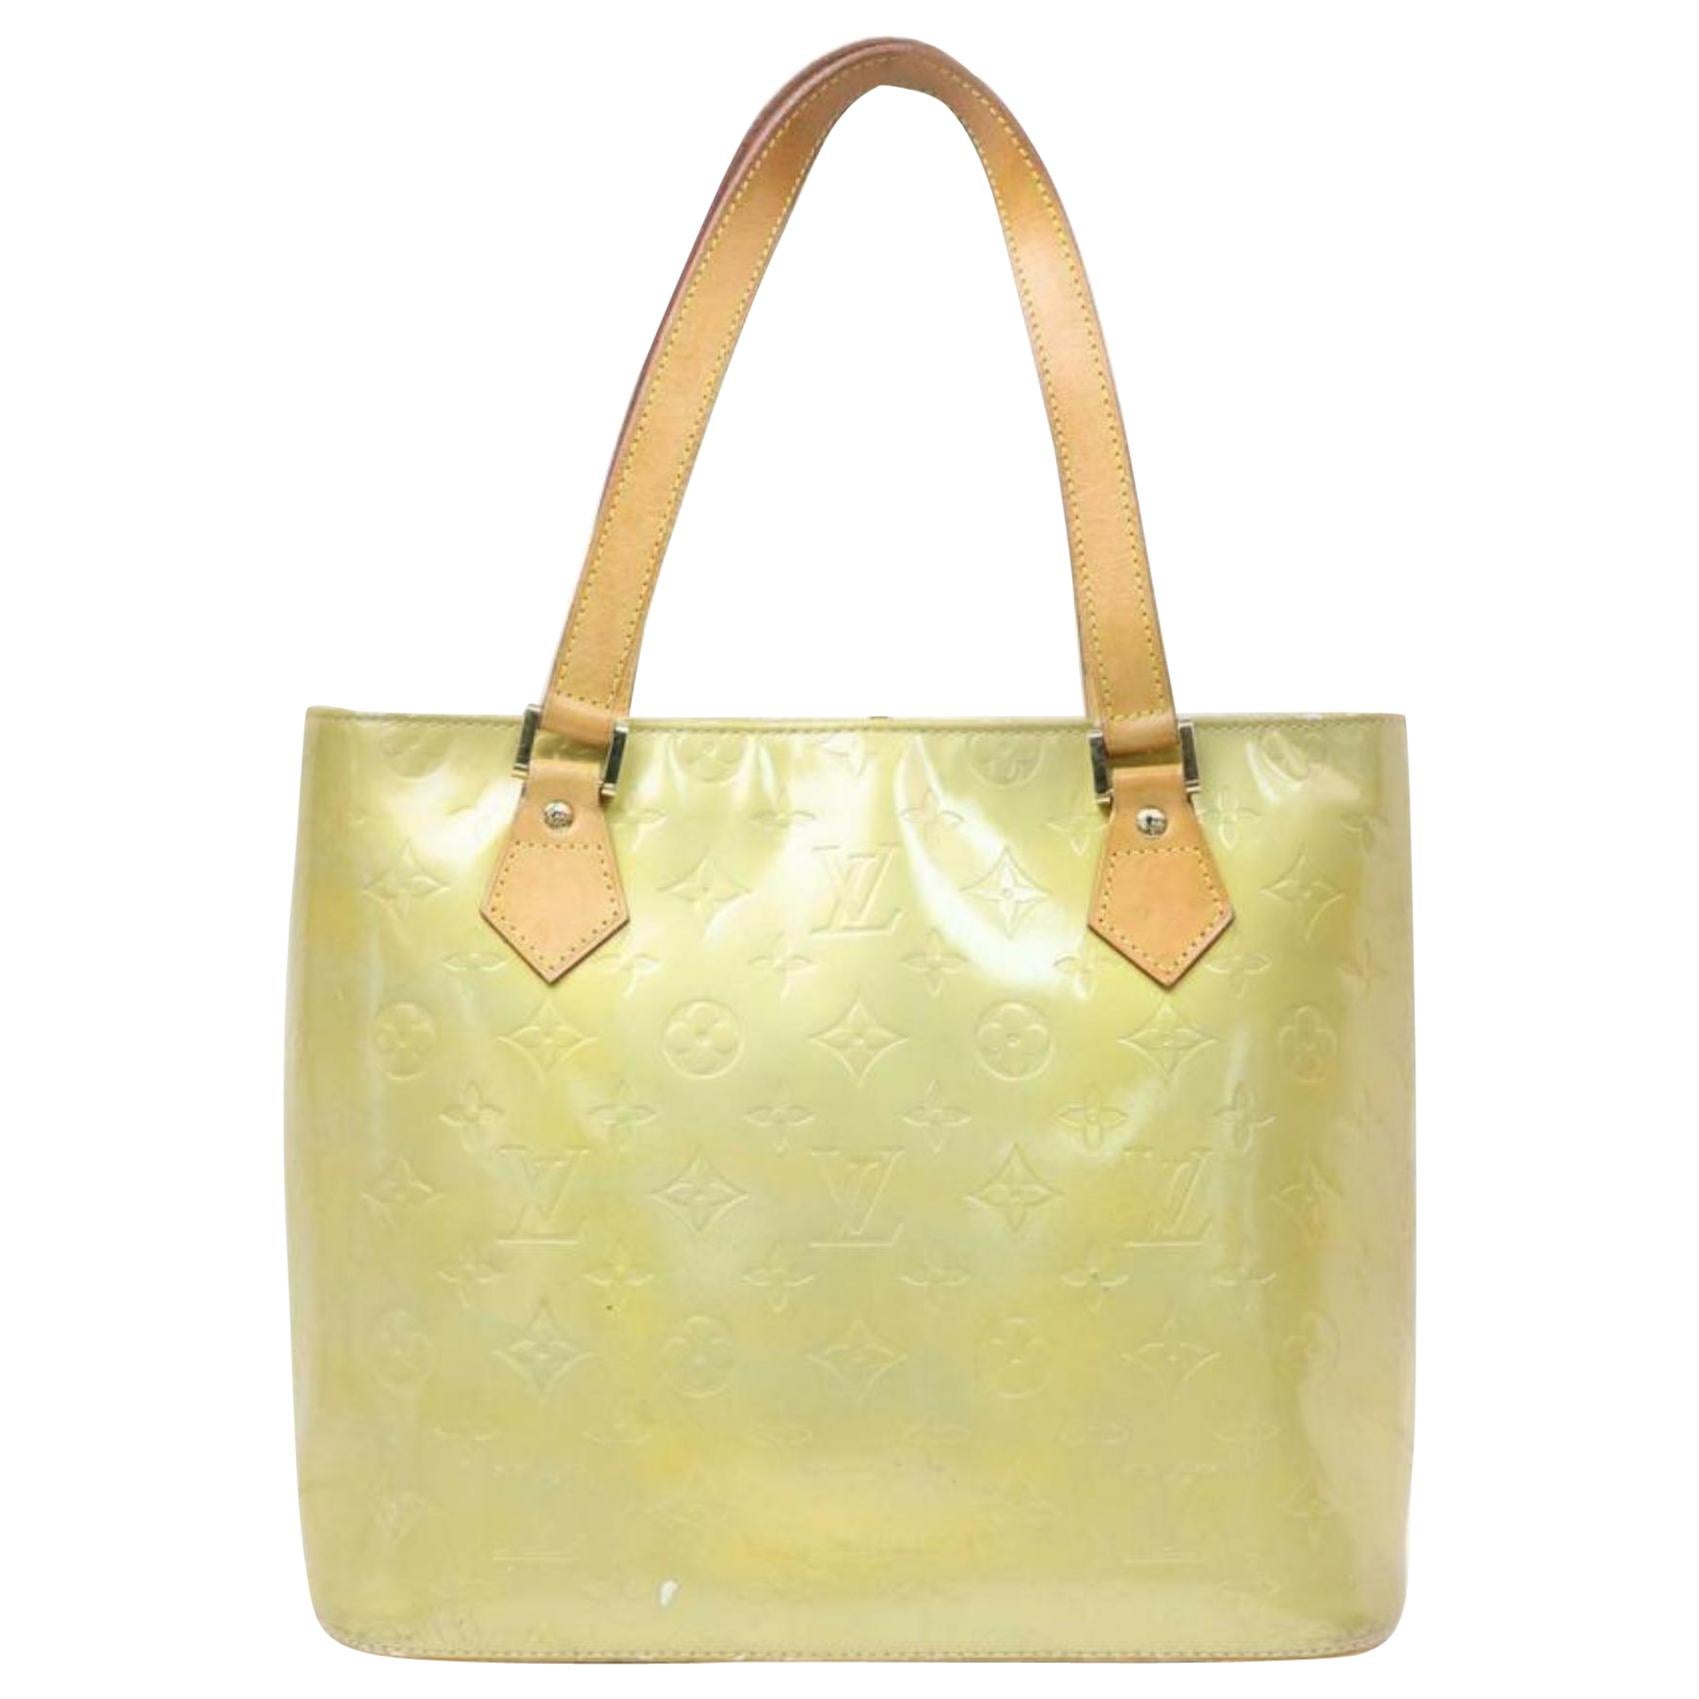 Louis Vuitton Houston Zip Tote 870593 Green-gold Vernis Leather and Shoulder Bag For Sale